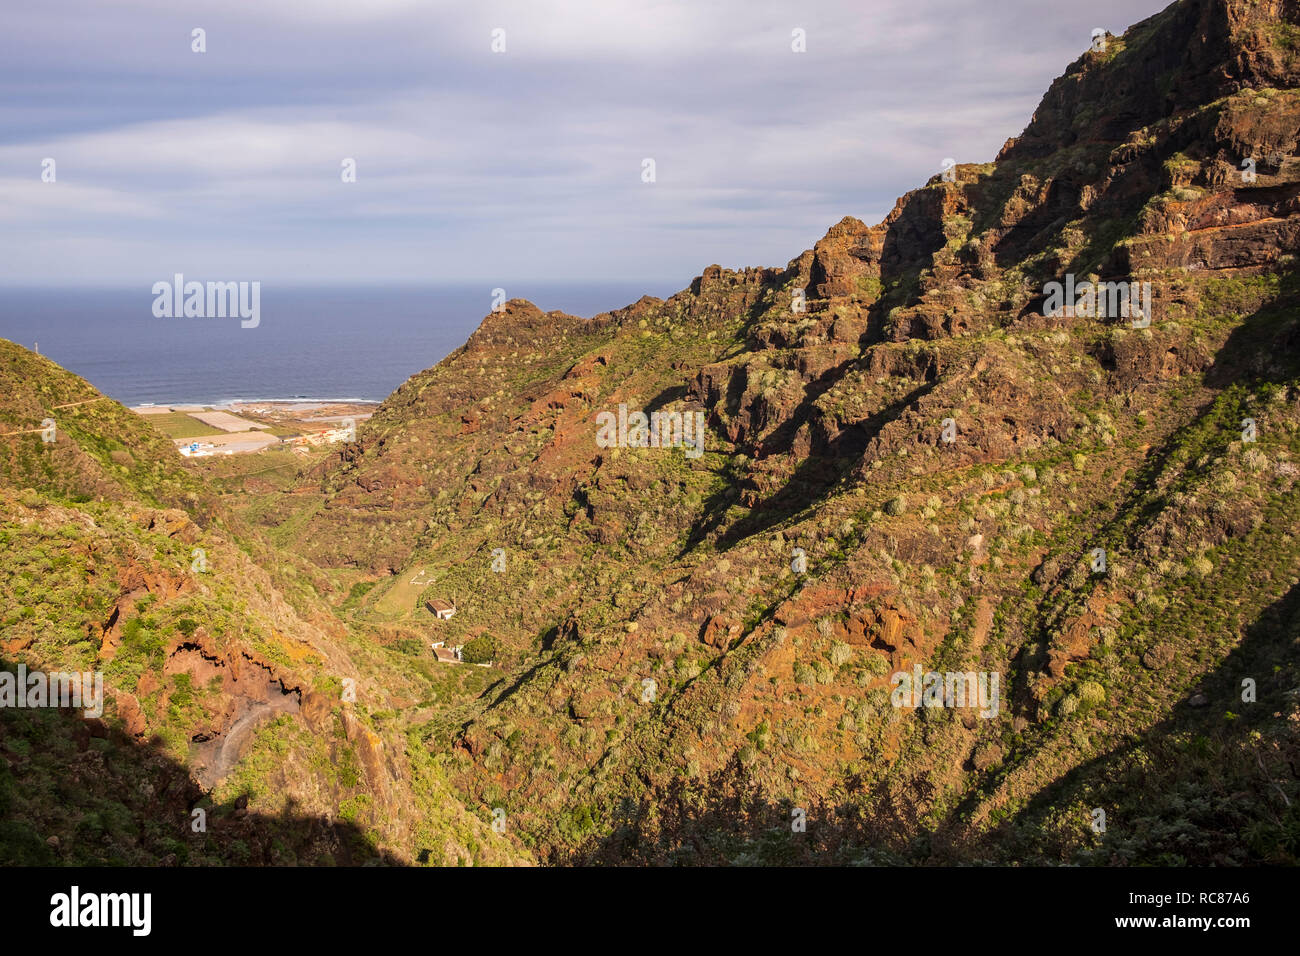 Views into the Barranco Seco from the water canals on the sides of the ravine in Anaga, Tenerife, Canary Islands, Spain Stock Photo